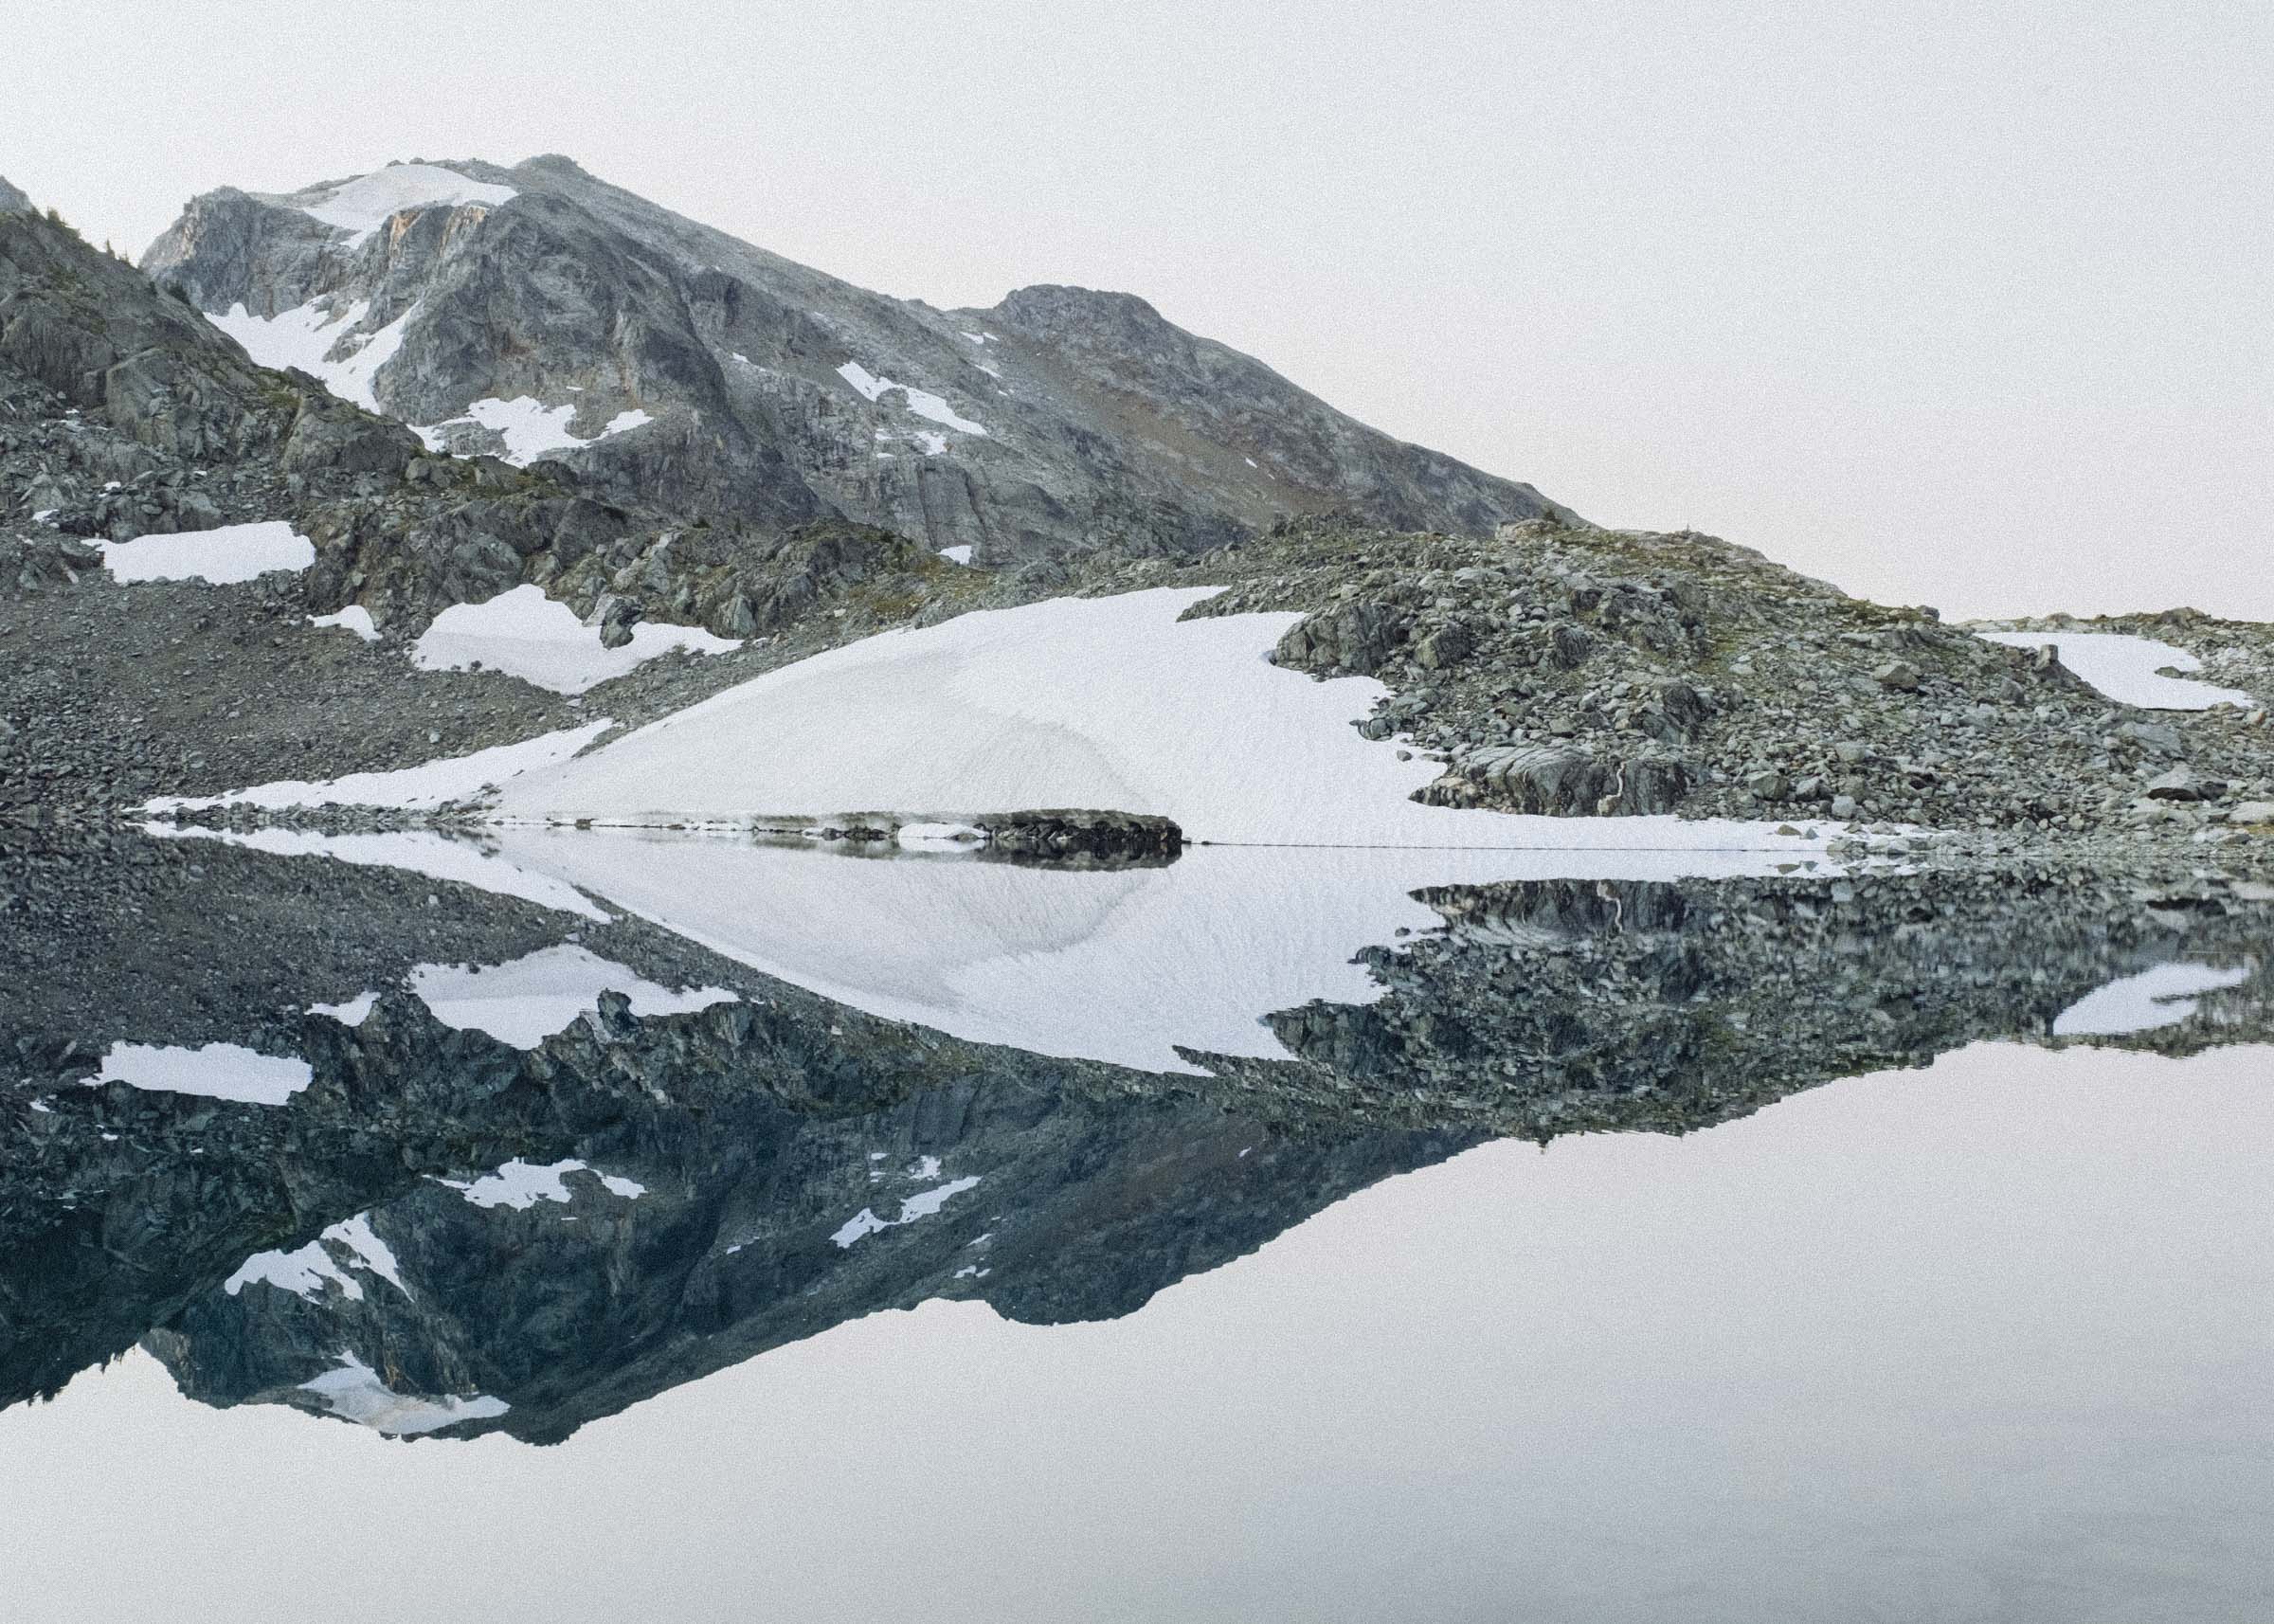 Mountain reflections and snowy mirrors